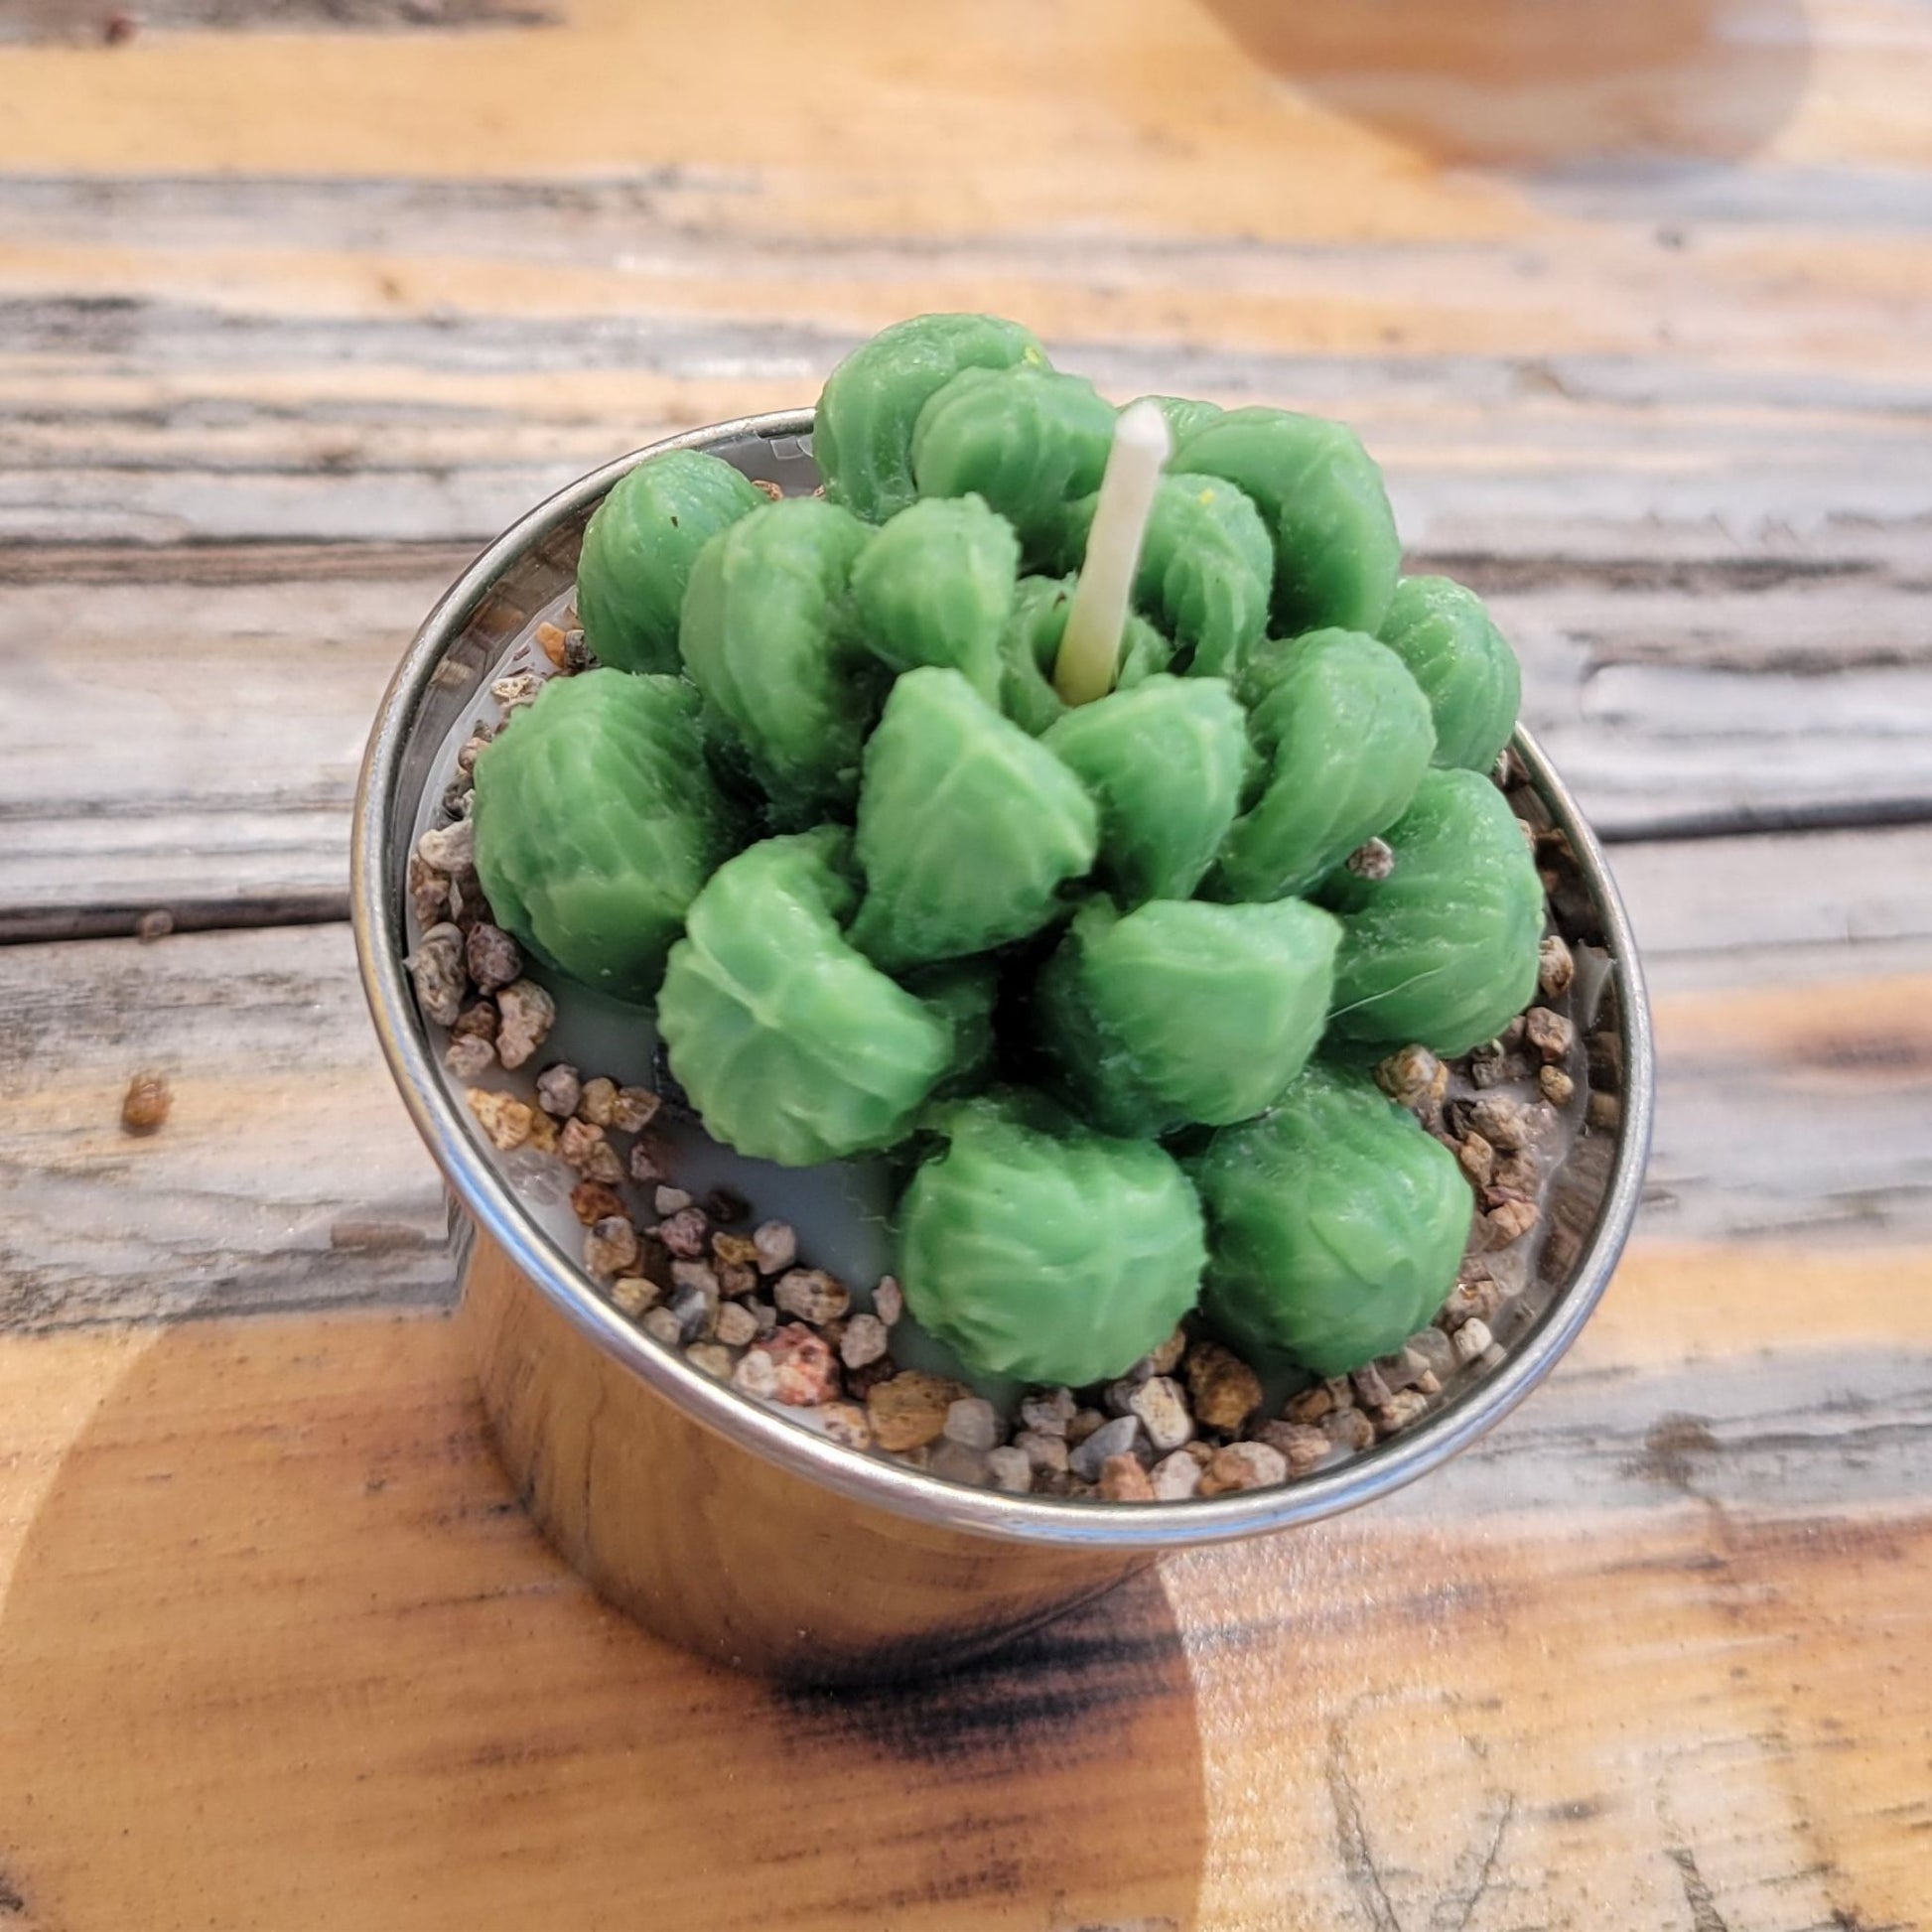 A handmade succulent candle in a stainless steel cup.